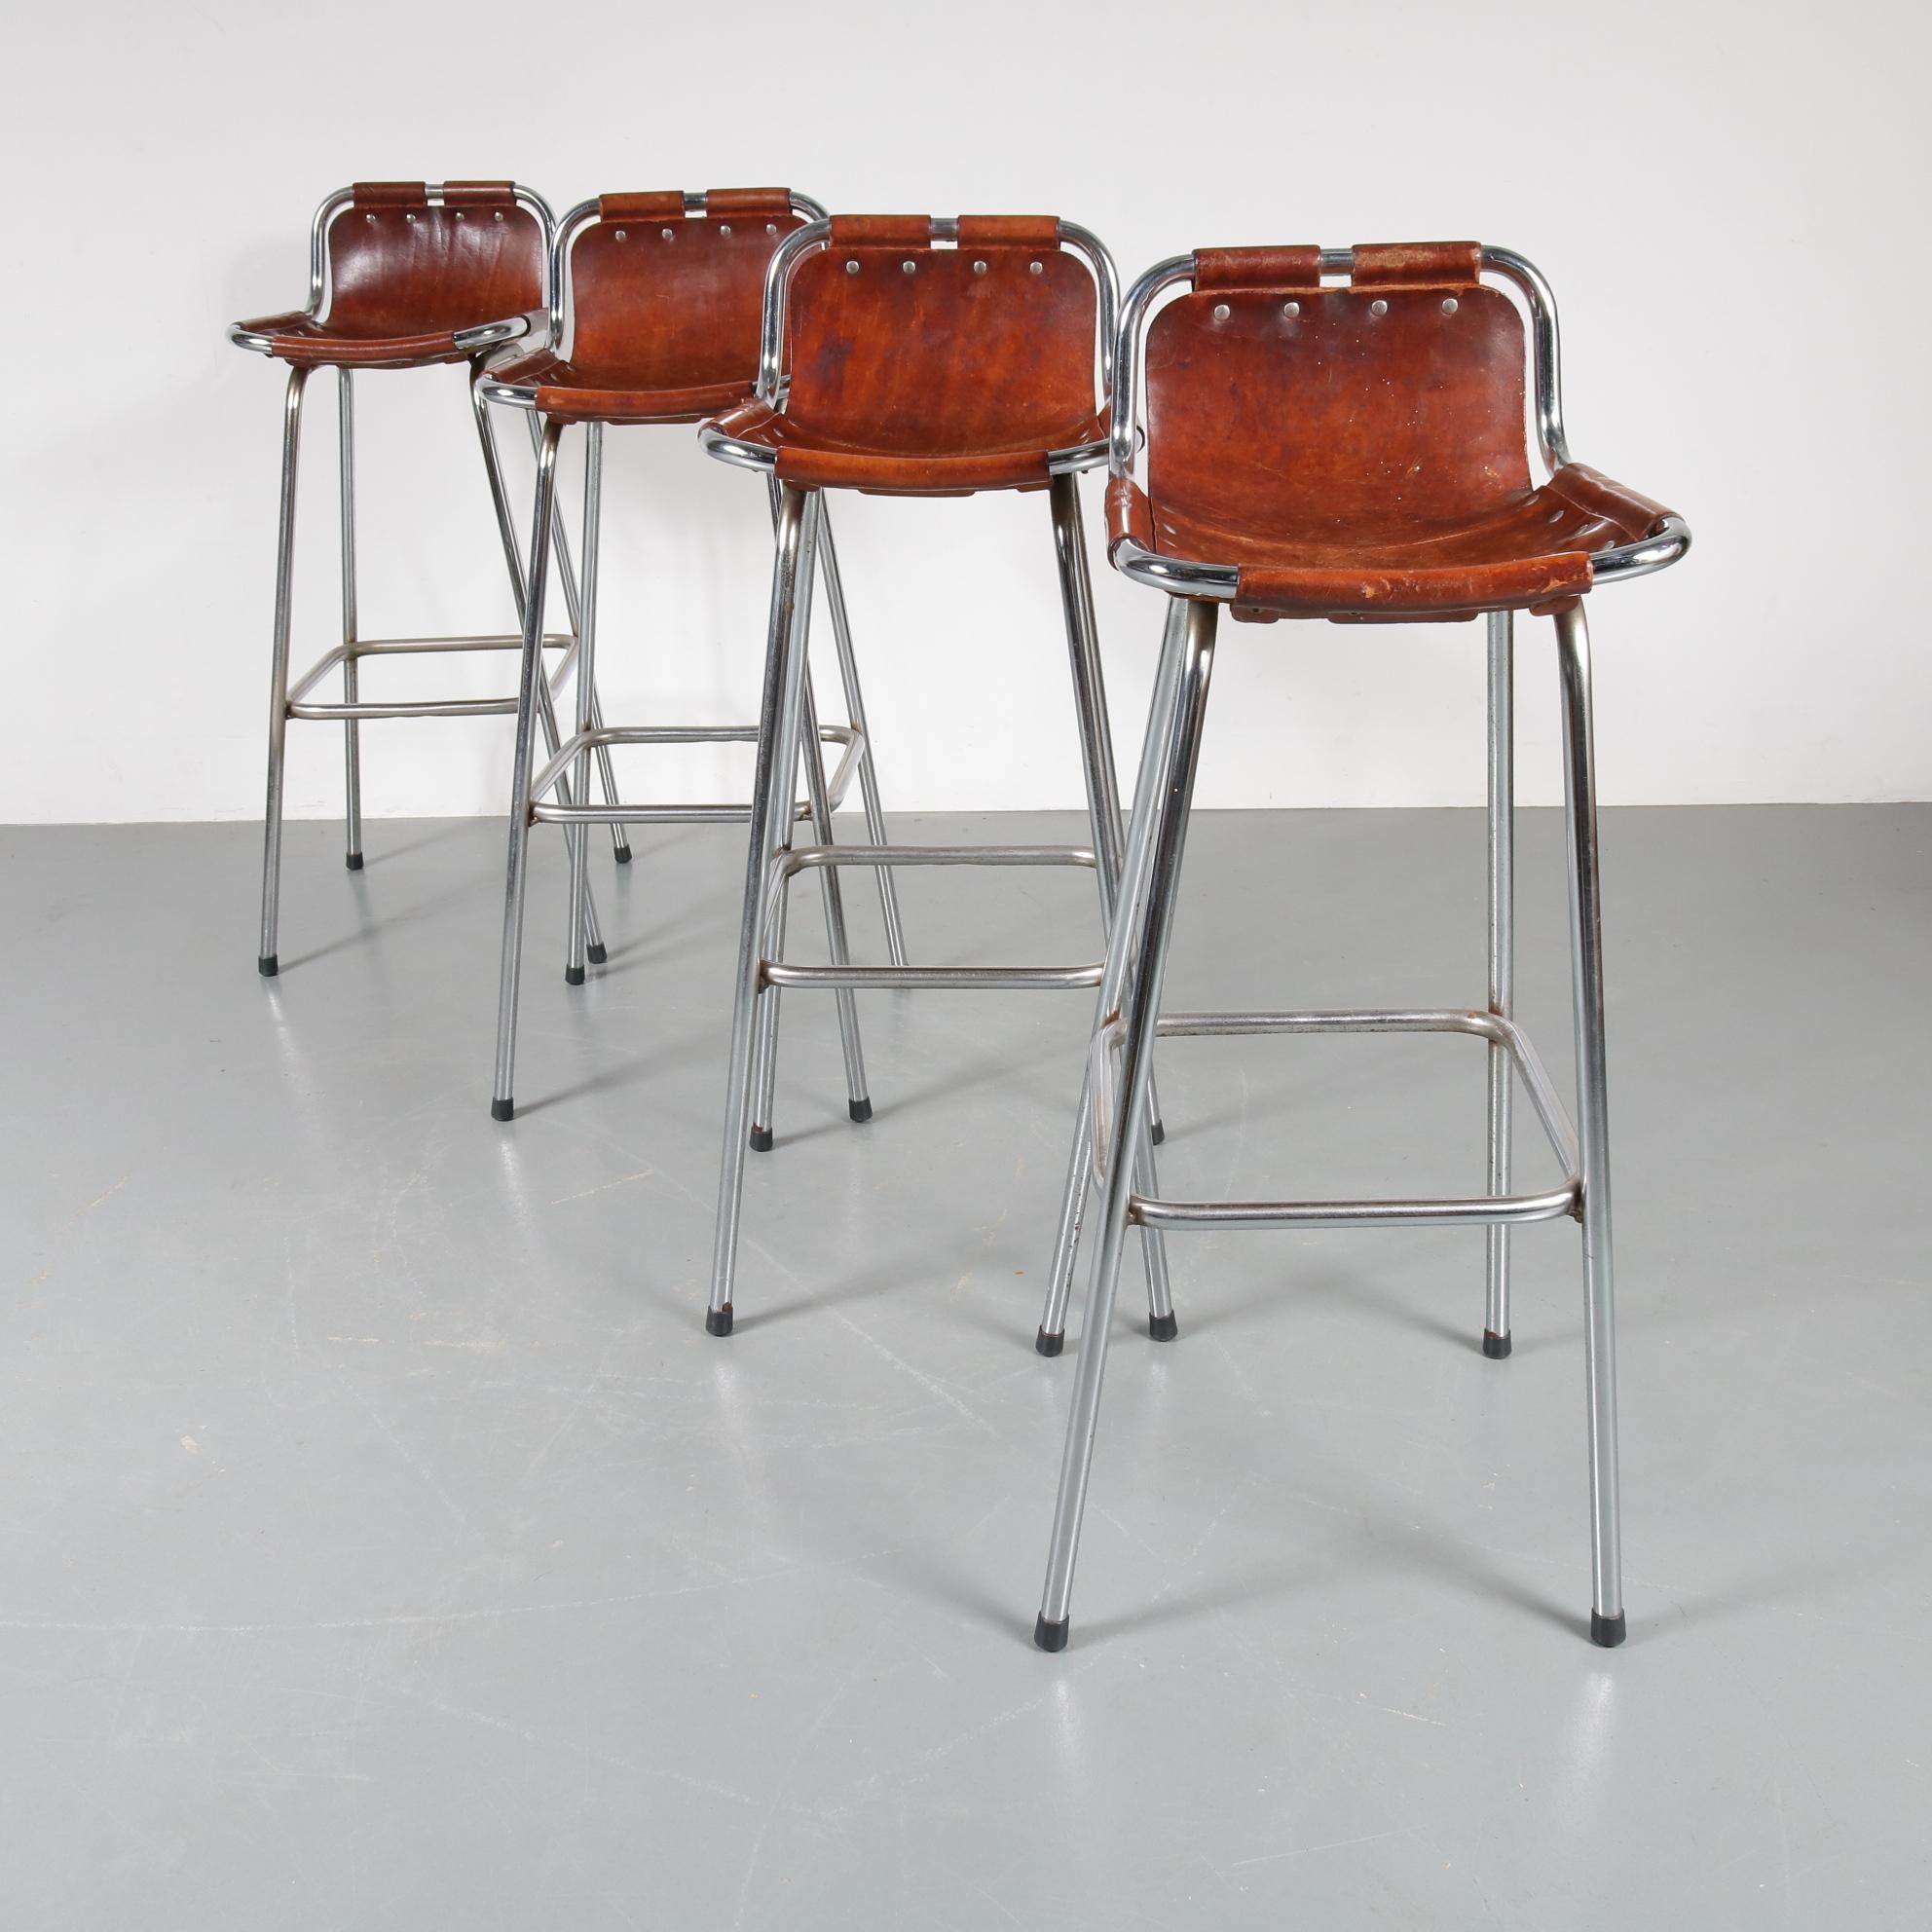 Stunning set of four bar stools selected by Charlotte Perriand for Les Arcs Ski Resort in France, manufactured circa 1960.

The bar stools have a beautiful chrome plated metal base and high quality leather seats with chrome plated buttons. This